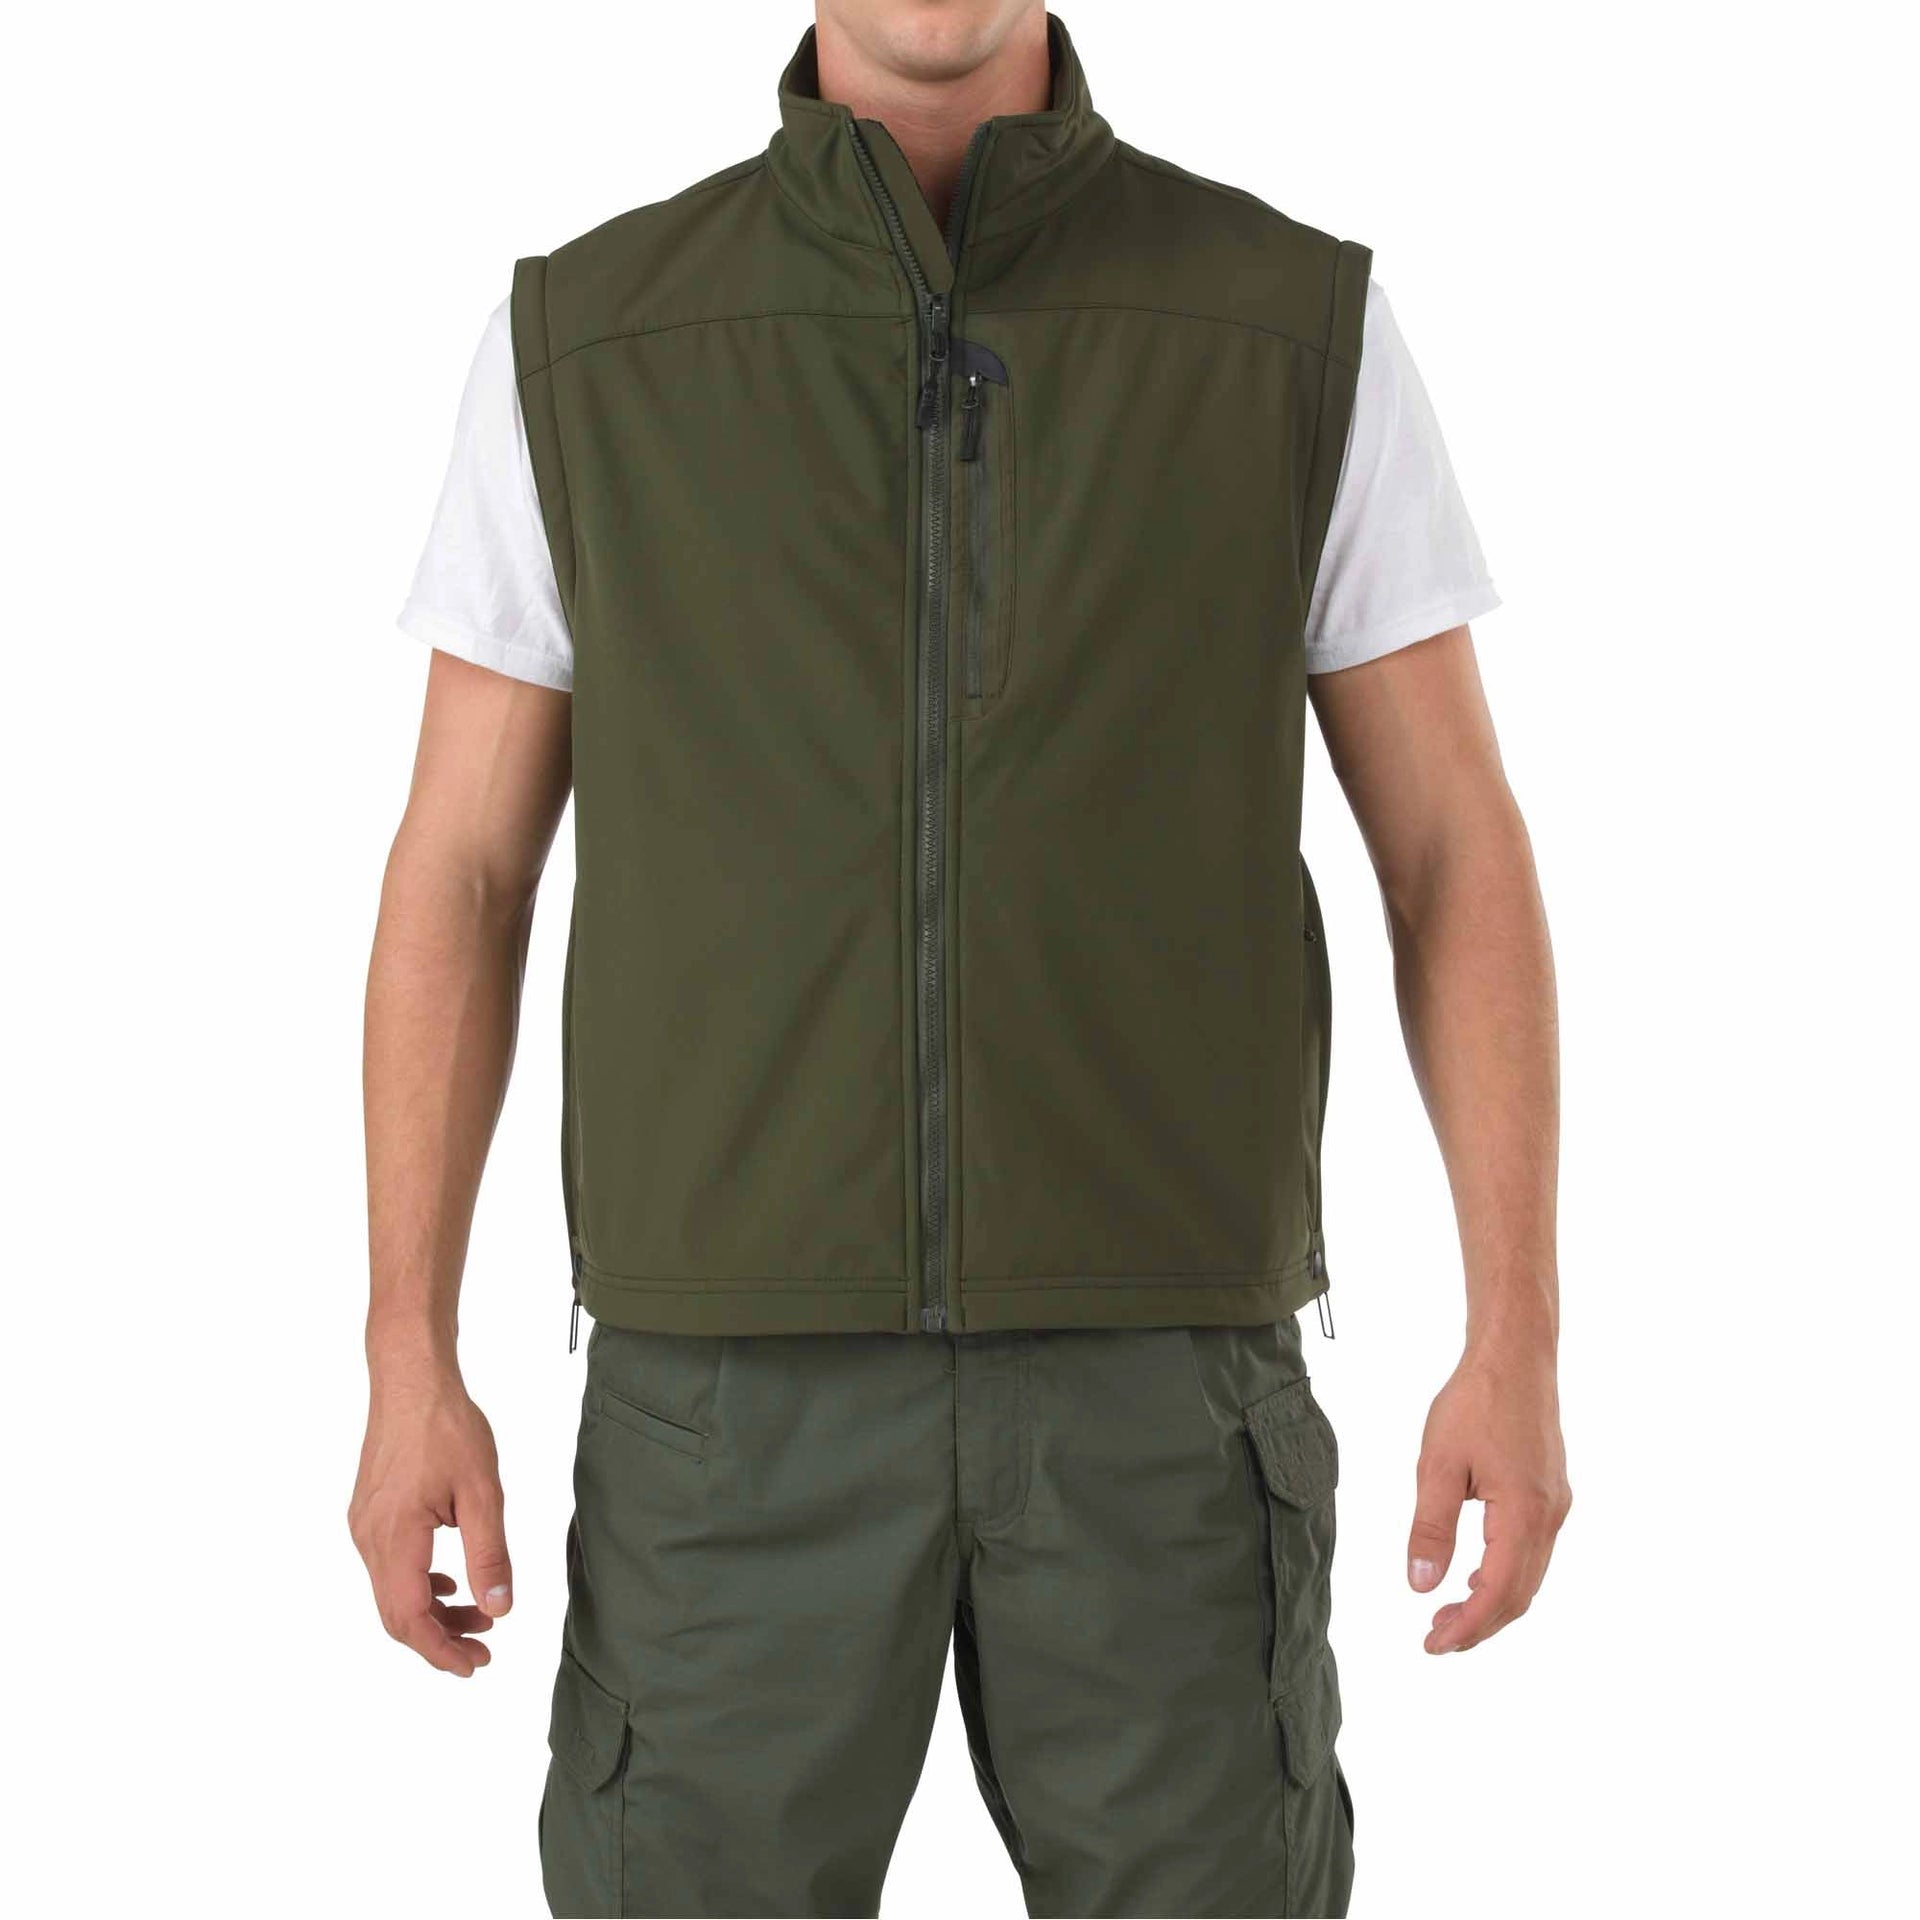 5.11 Tactical Valiant Duty Jacket (48153) | The Fire Center | Fuego Fire Center |  Built on a 5-in-1 platform, the Valiant Duty Jacket consists of a high-performance shell and a removable matching softshell jacket that works as a standalone jacket or converts to a vest (also available separately). 